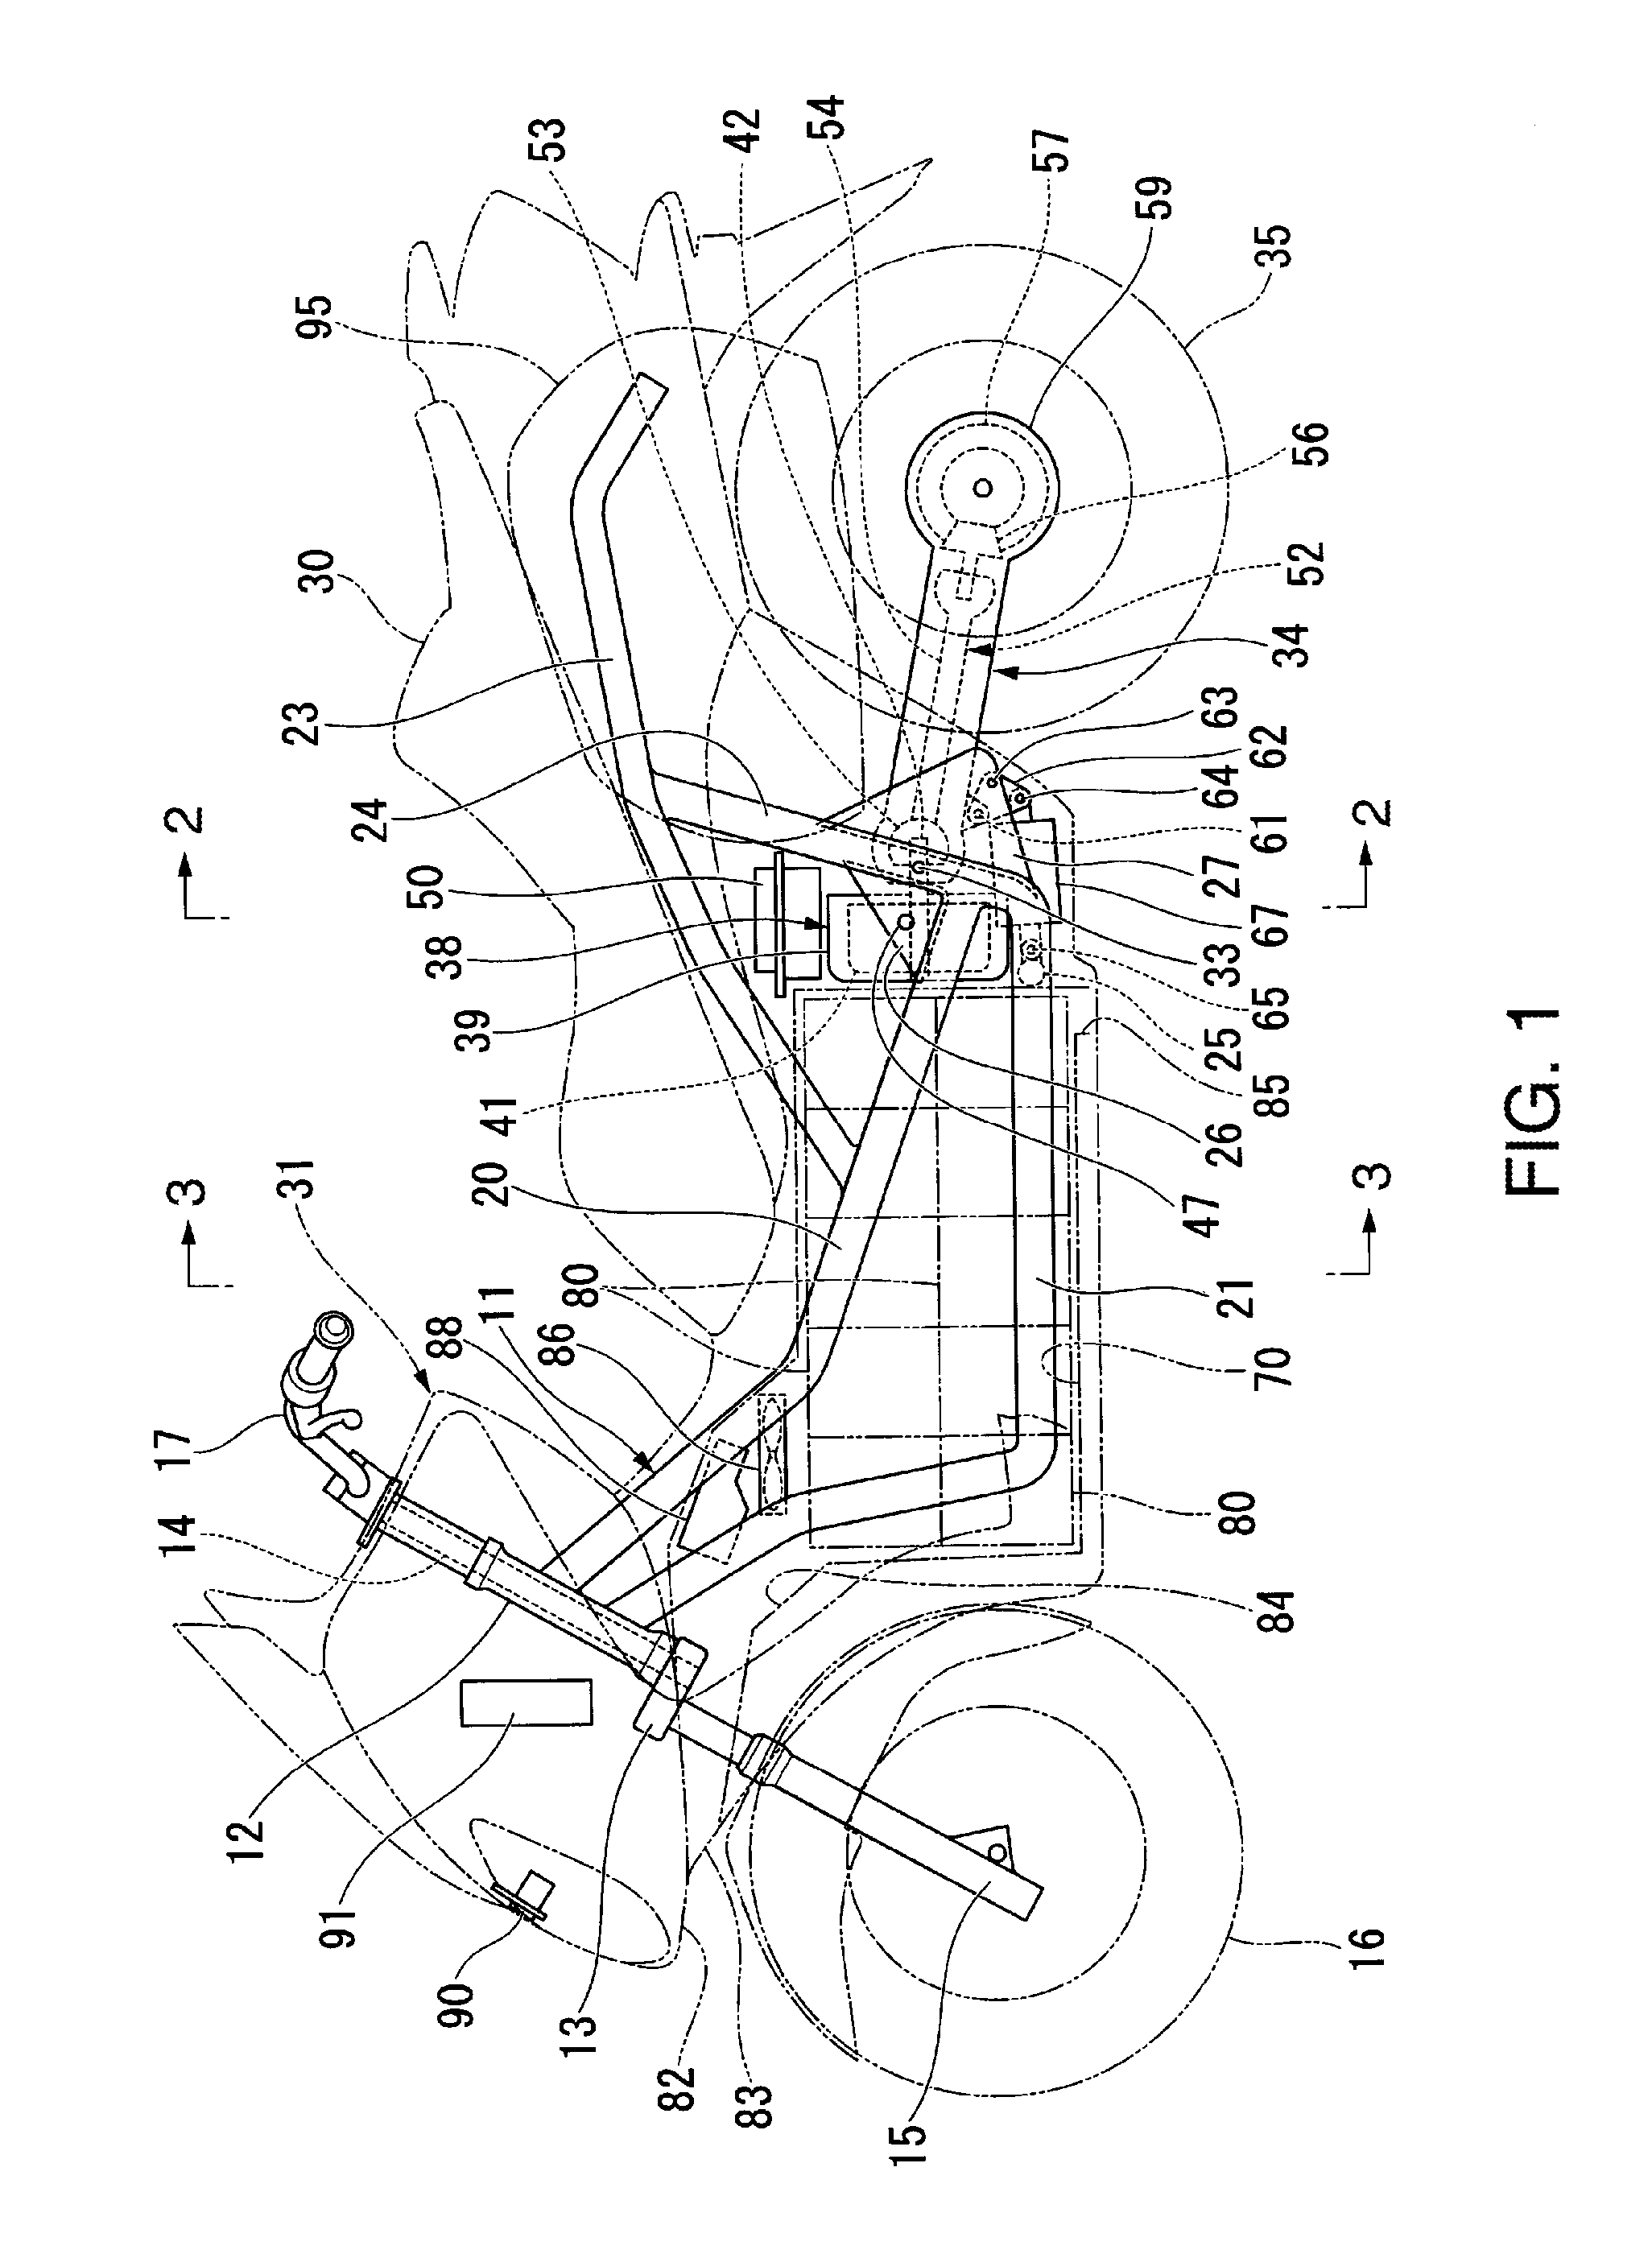 Electric vehicle having drivetrain and suspension